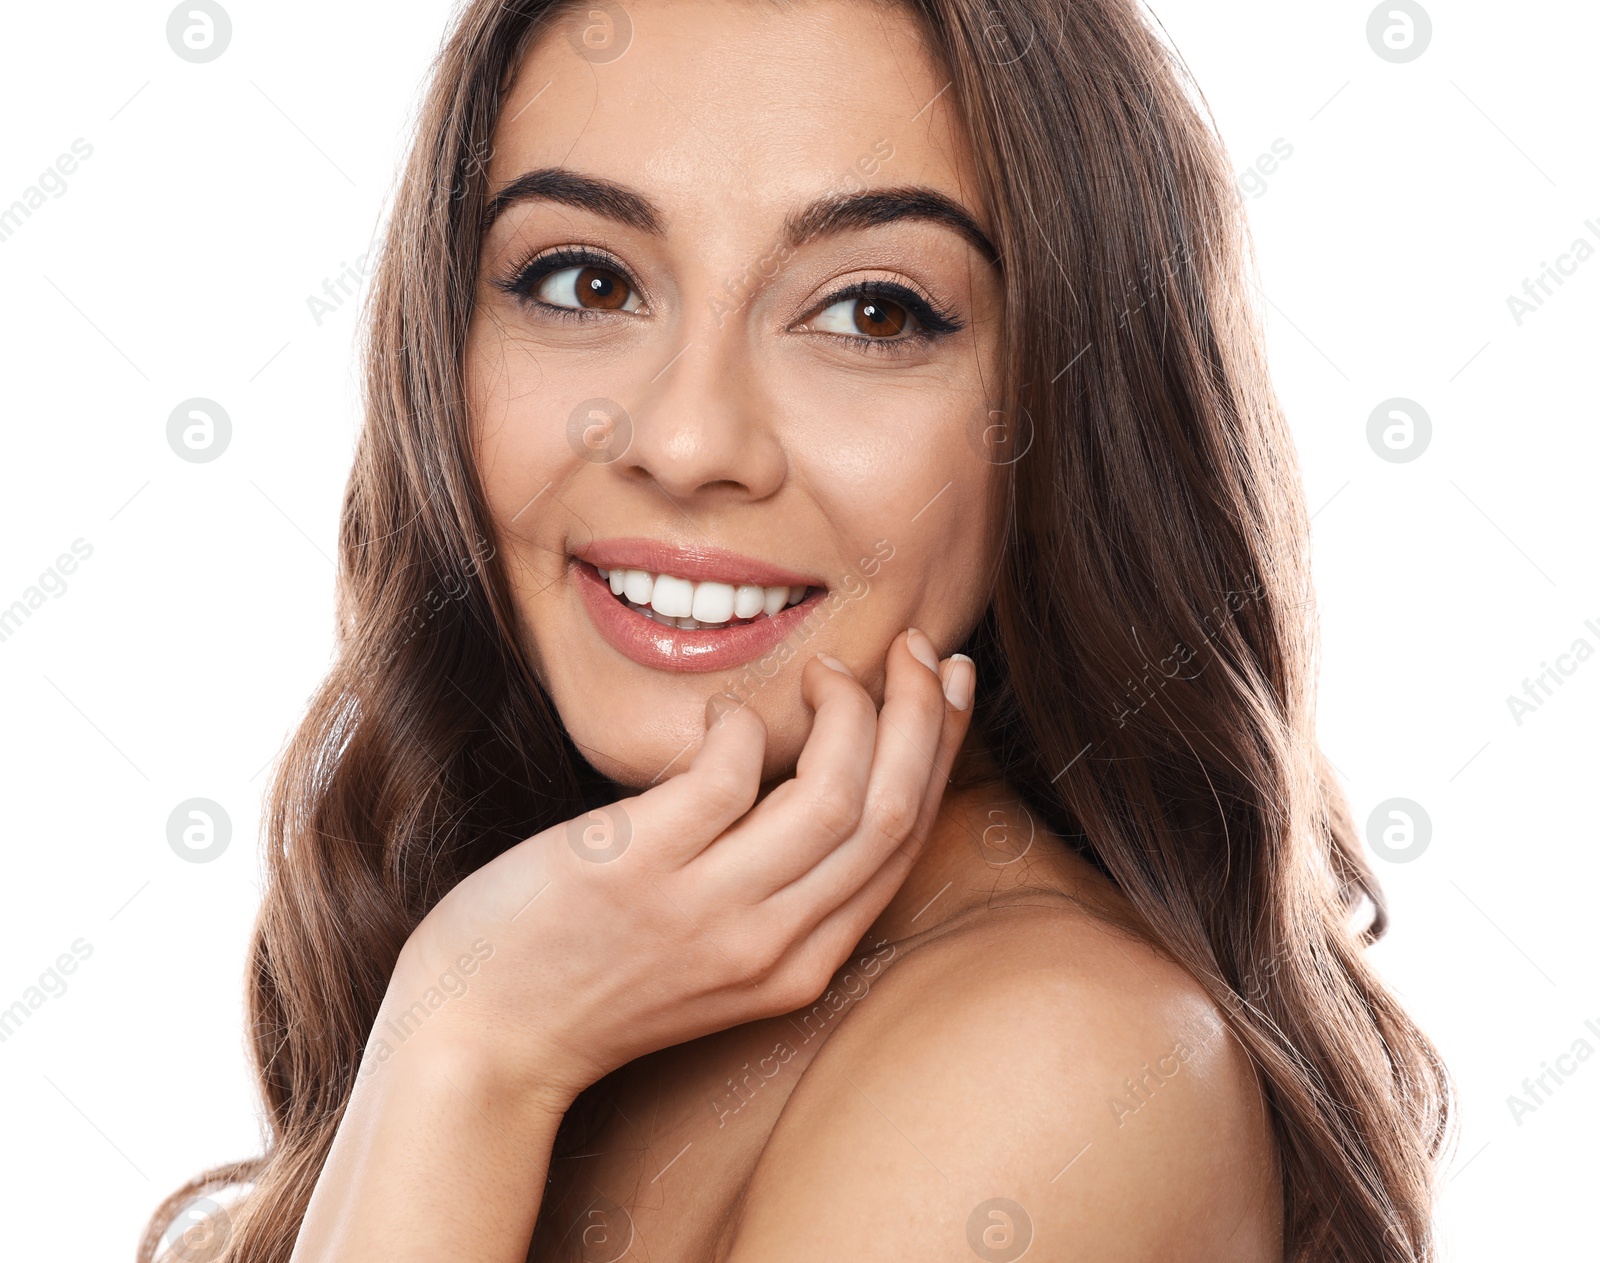 Photo of Beautiful woman with shiny wavy hair on white background